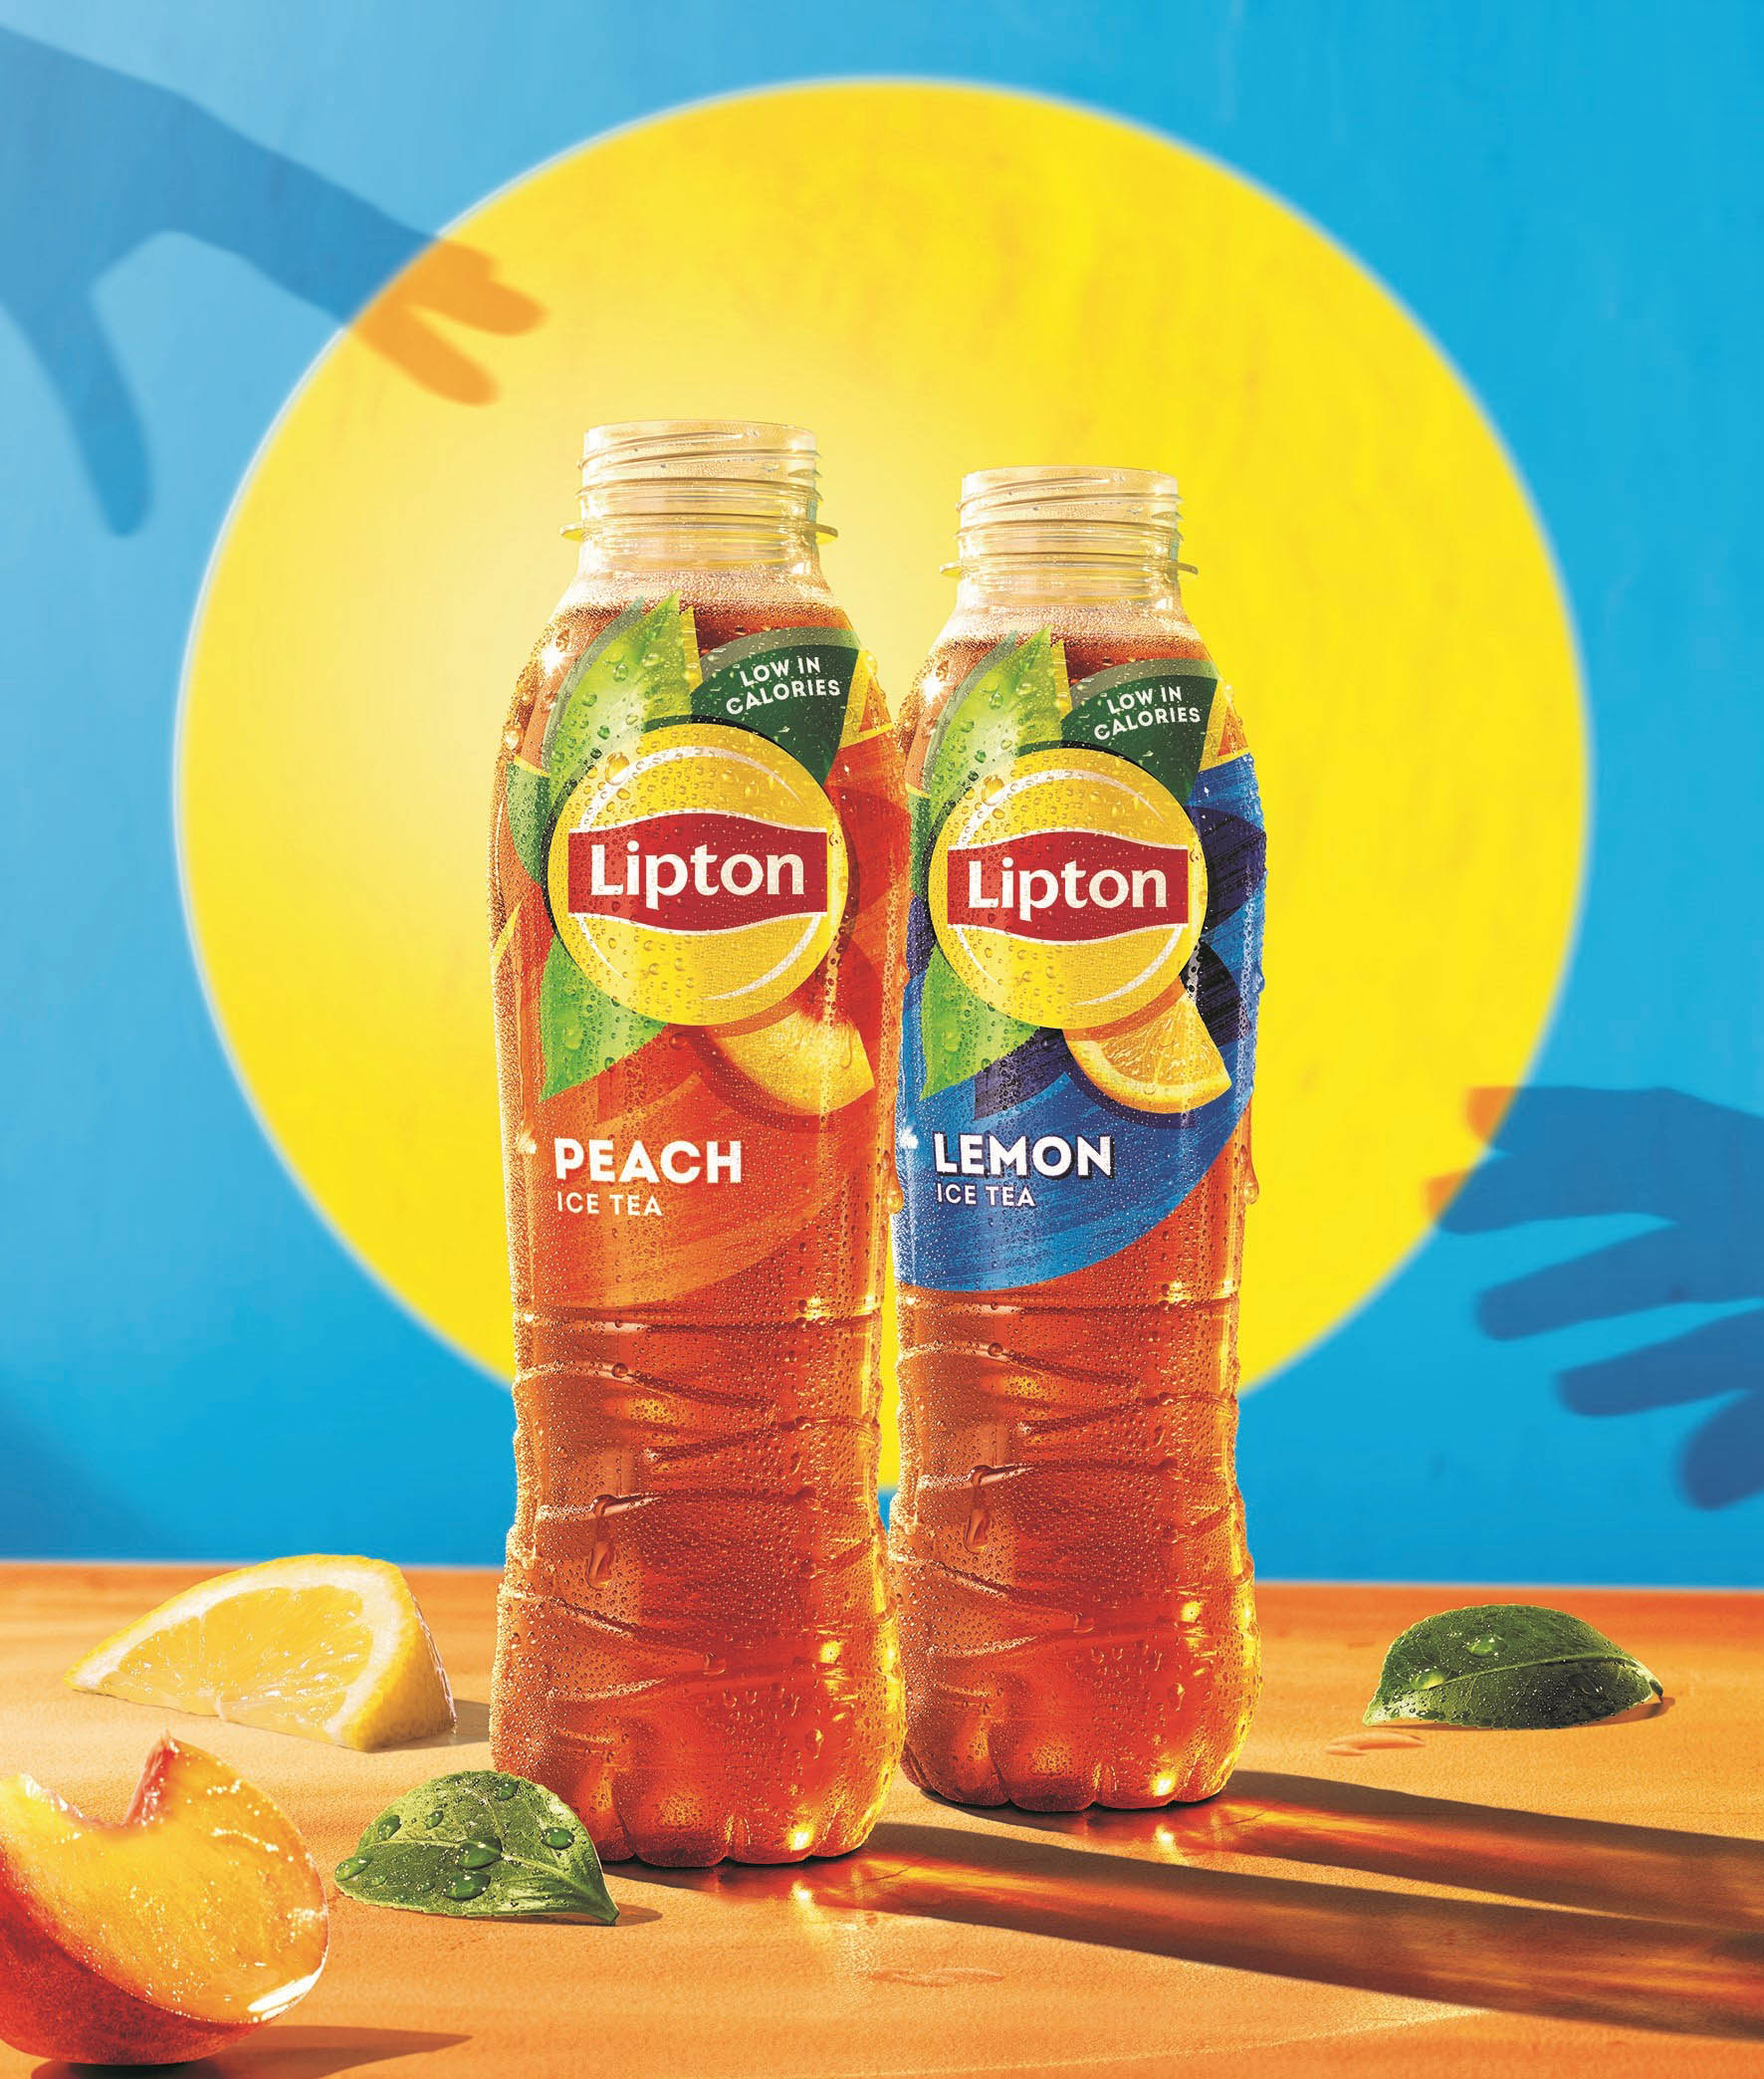 Lipton Ice Tea goes for growth with core range relaunch and new packaging